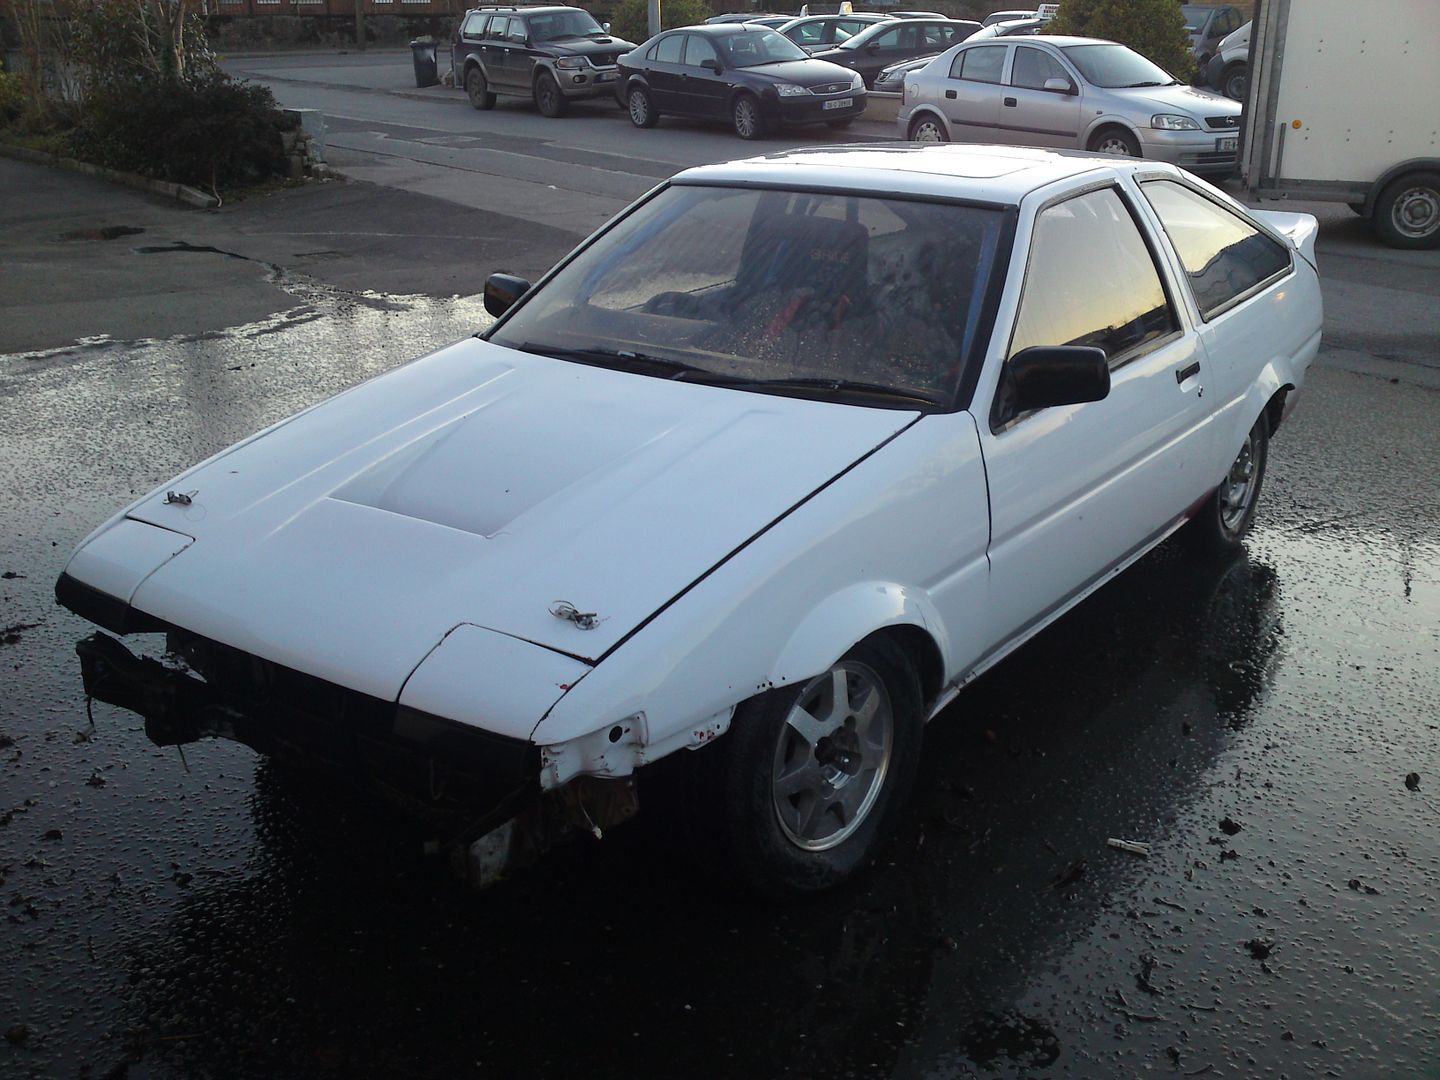 [Image: AEU86 AE86 - MCNSPORT: Your chance to ow...SPORT AE86]